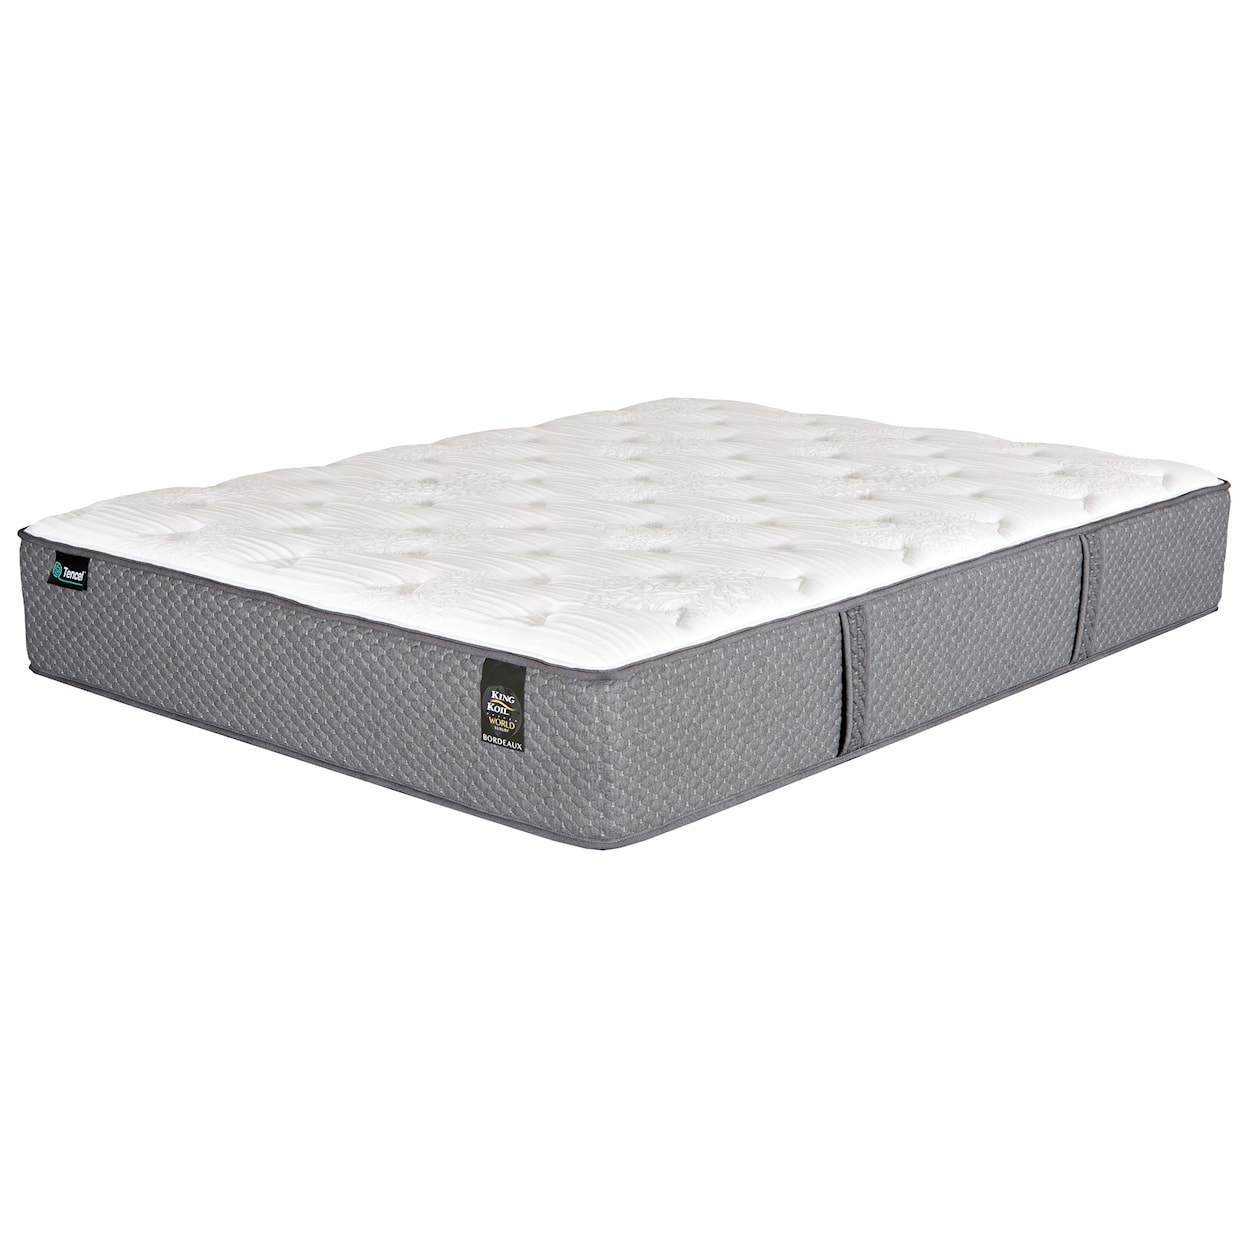 King Koil Beaumont P Full Pocketed Coil Mattress